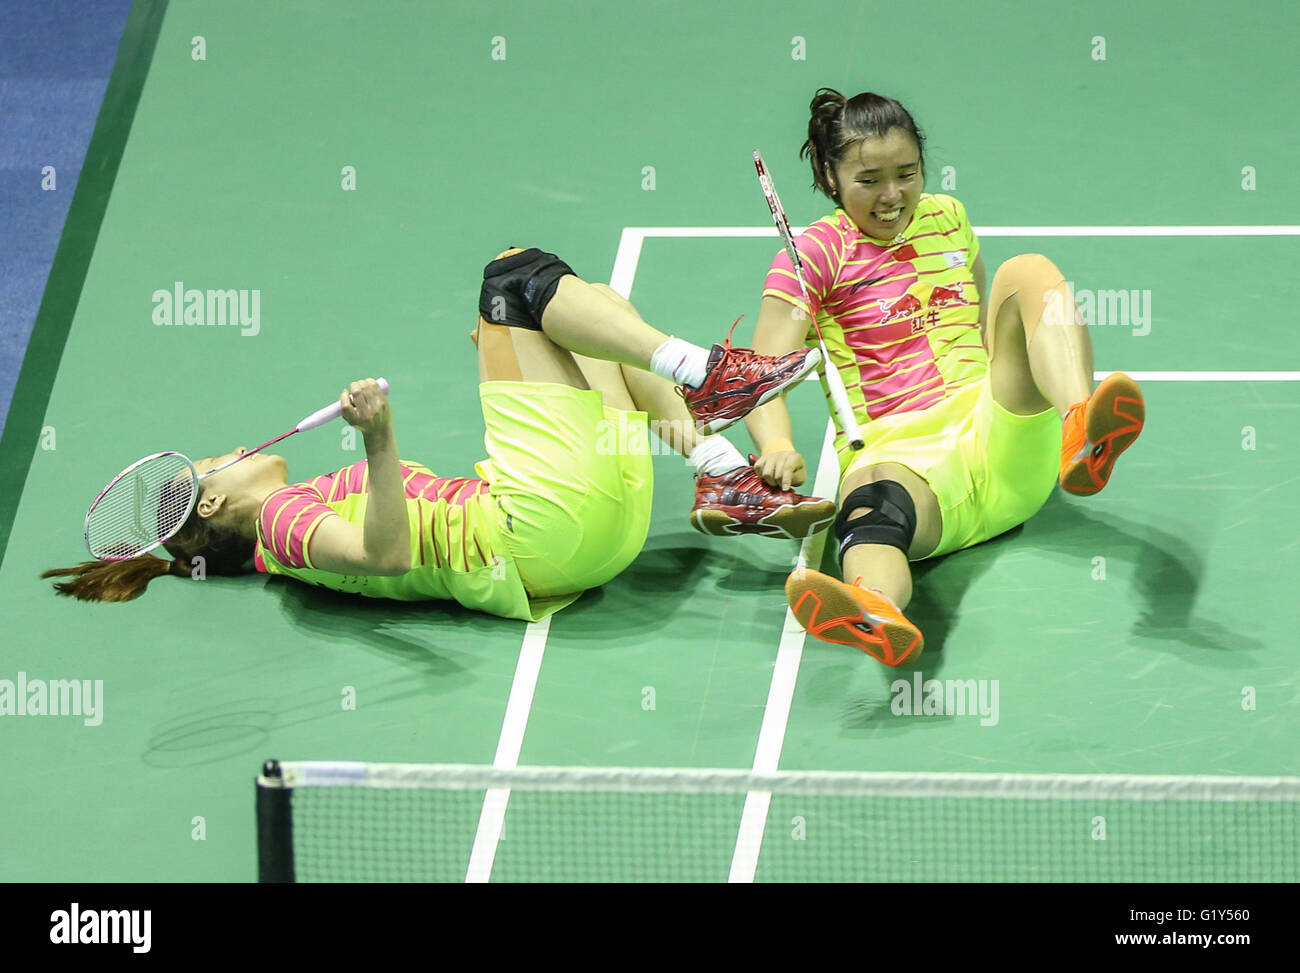 Kunshan, China's Jiangsu Province. 21st May, 2016. Tian Qing (R) and Zhao Yunlei of China fall down together during the women's doubles match against Jung Kyung Eun and Shin Seung Chan of South Korea at the Uber Cup badminton championship in Kunshan, east China's Jiangsu Province, May 21, 2016. China won the title by 3-1. © Yang Lei/Xinhua/Alamy Live News Stock Photo